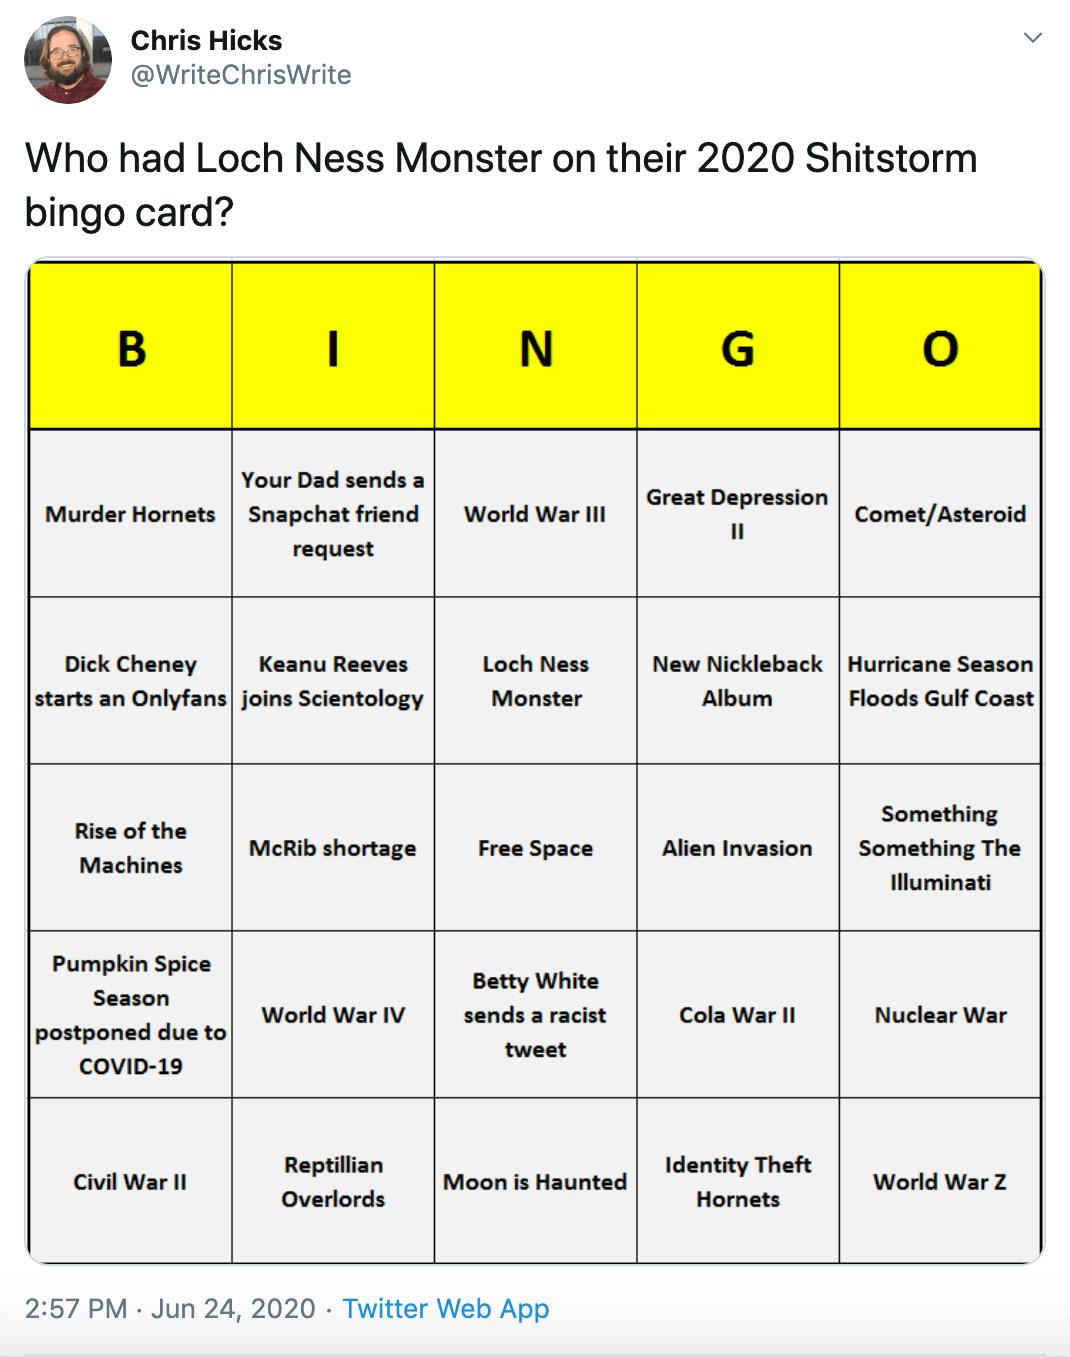 Who had Loch Ness Monster on their 2020 Shitstorm bingo card?